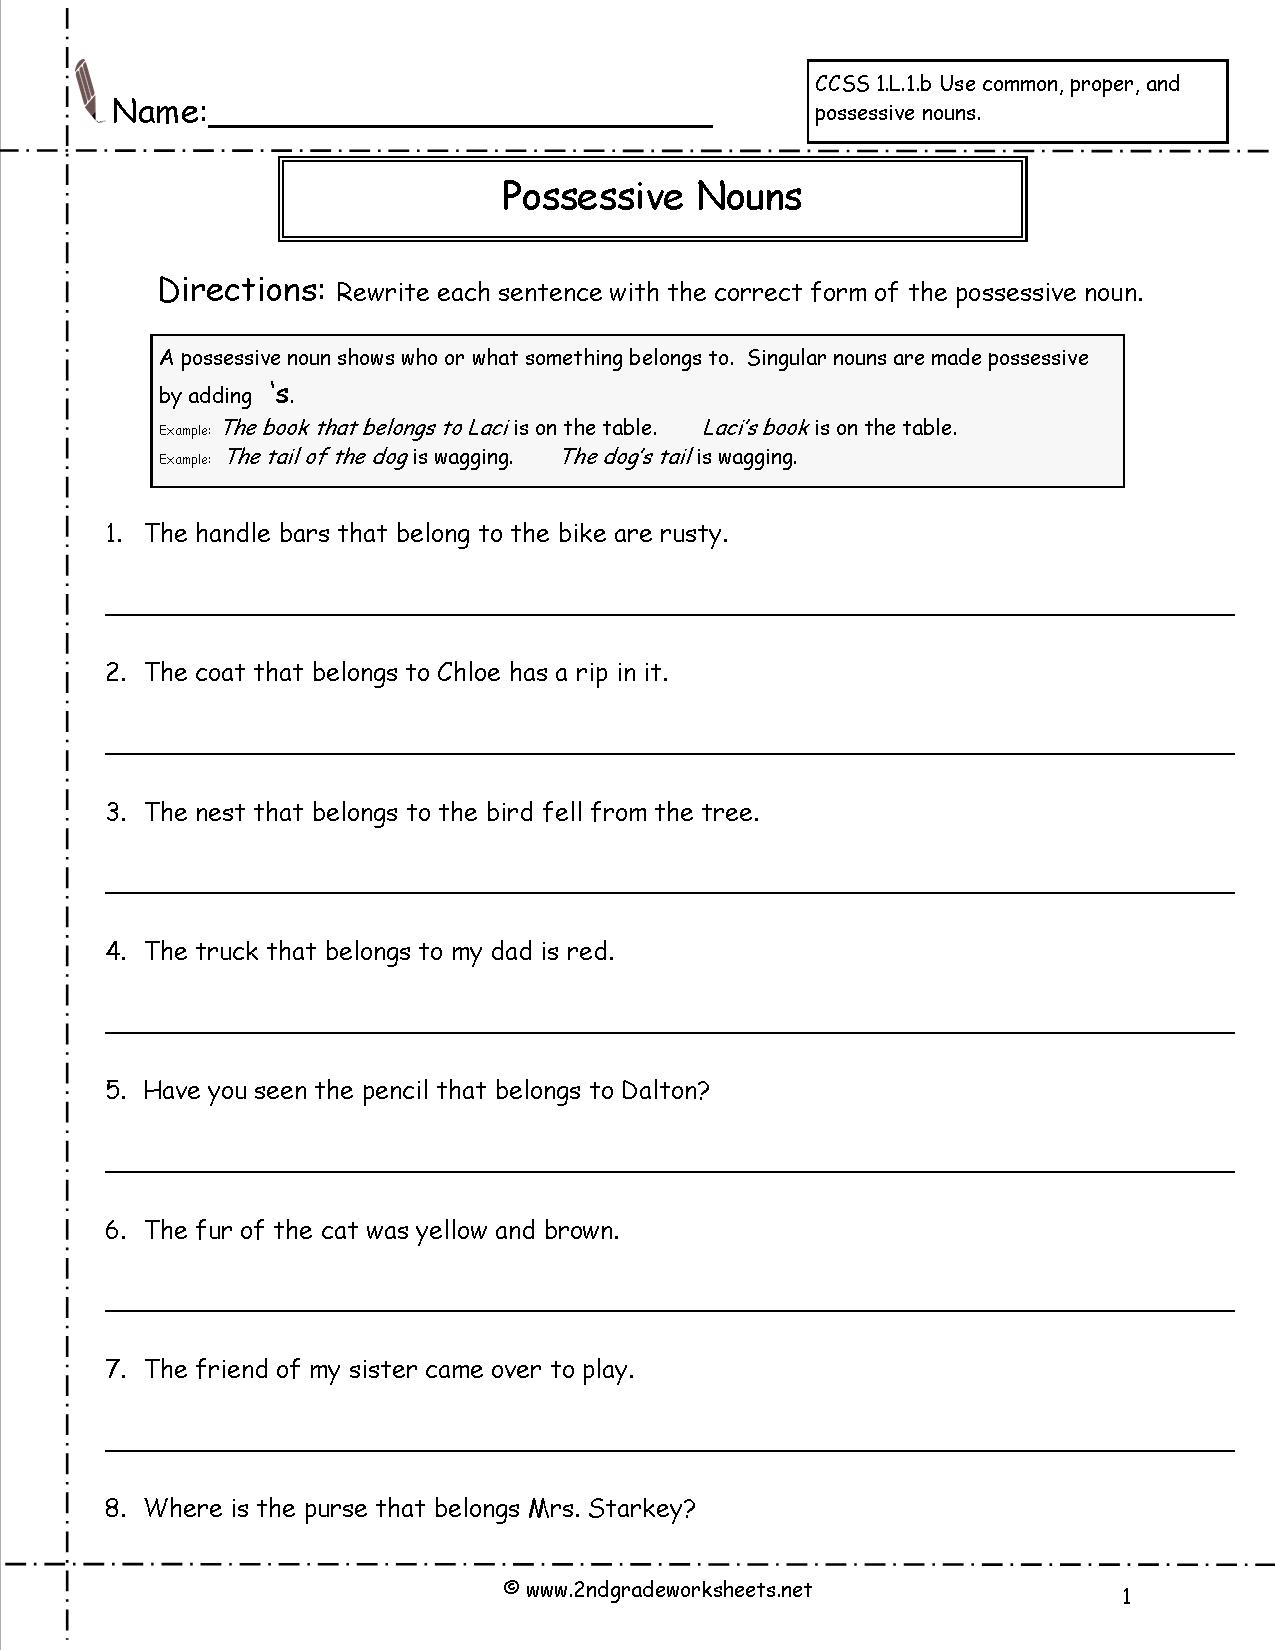 quiz-tenses-plural-and-possessive-nouns-worksheet-for-7th-9th-grade-lesson-planet